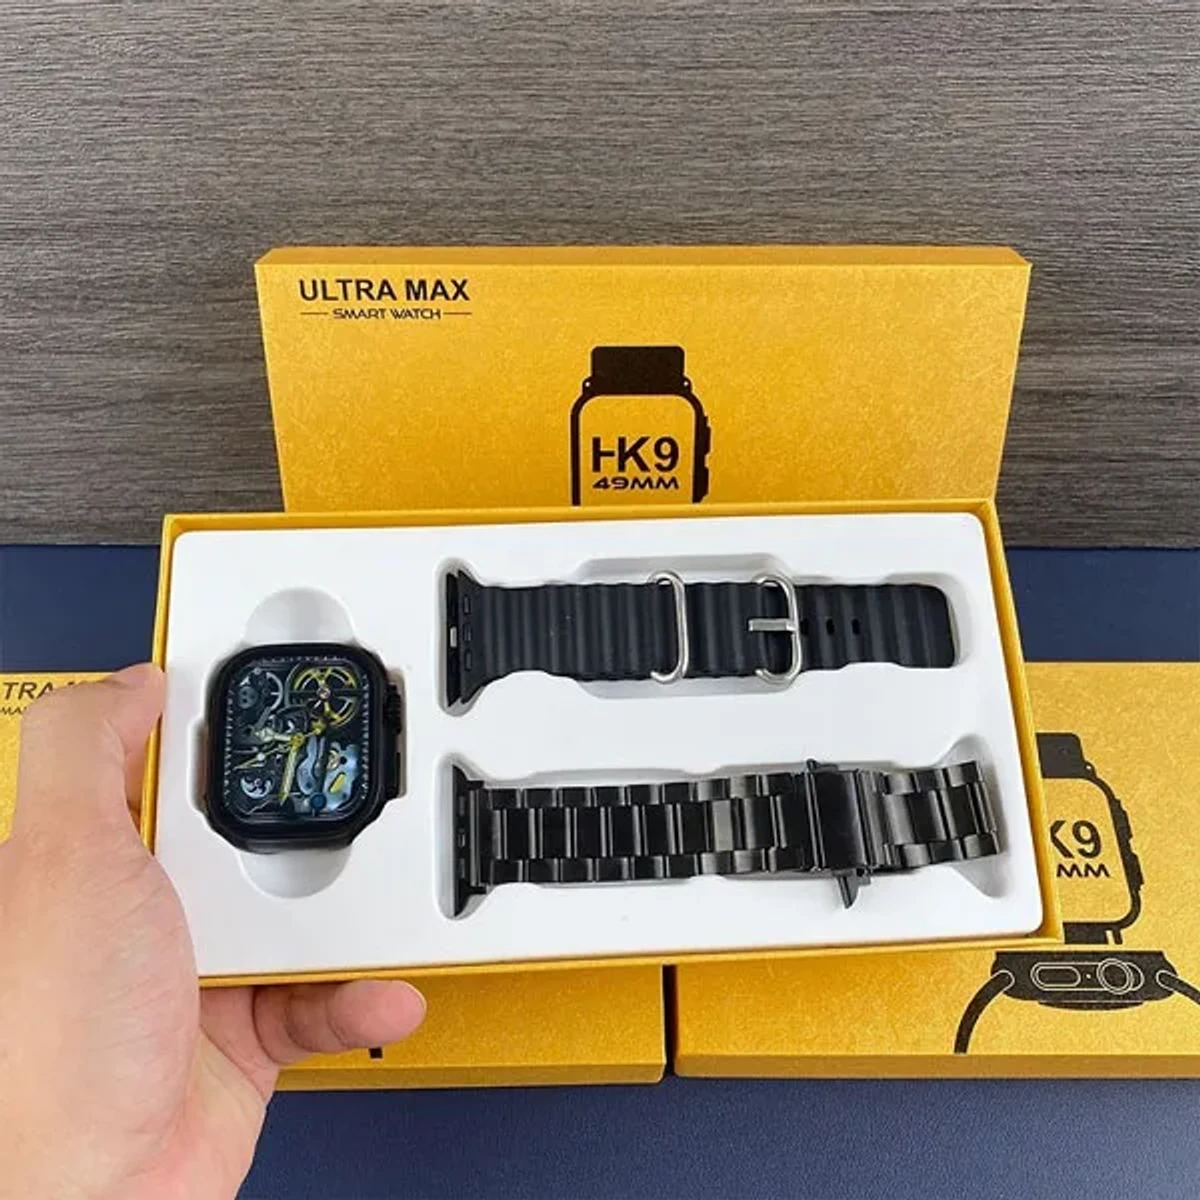 HK9 Ultra AMOLED Screen ChatGPT Supported Smartwatch